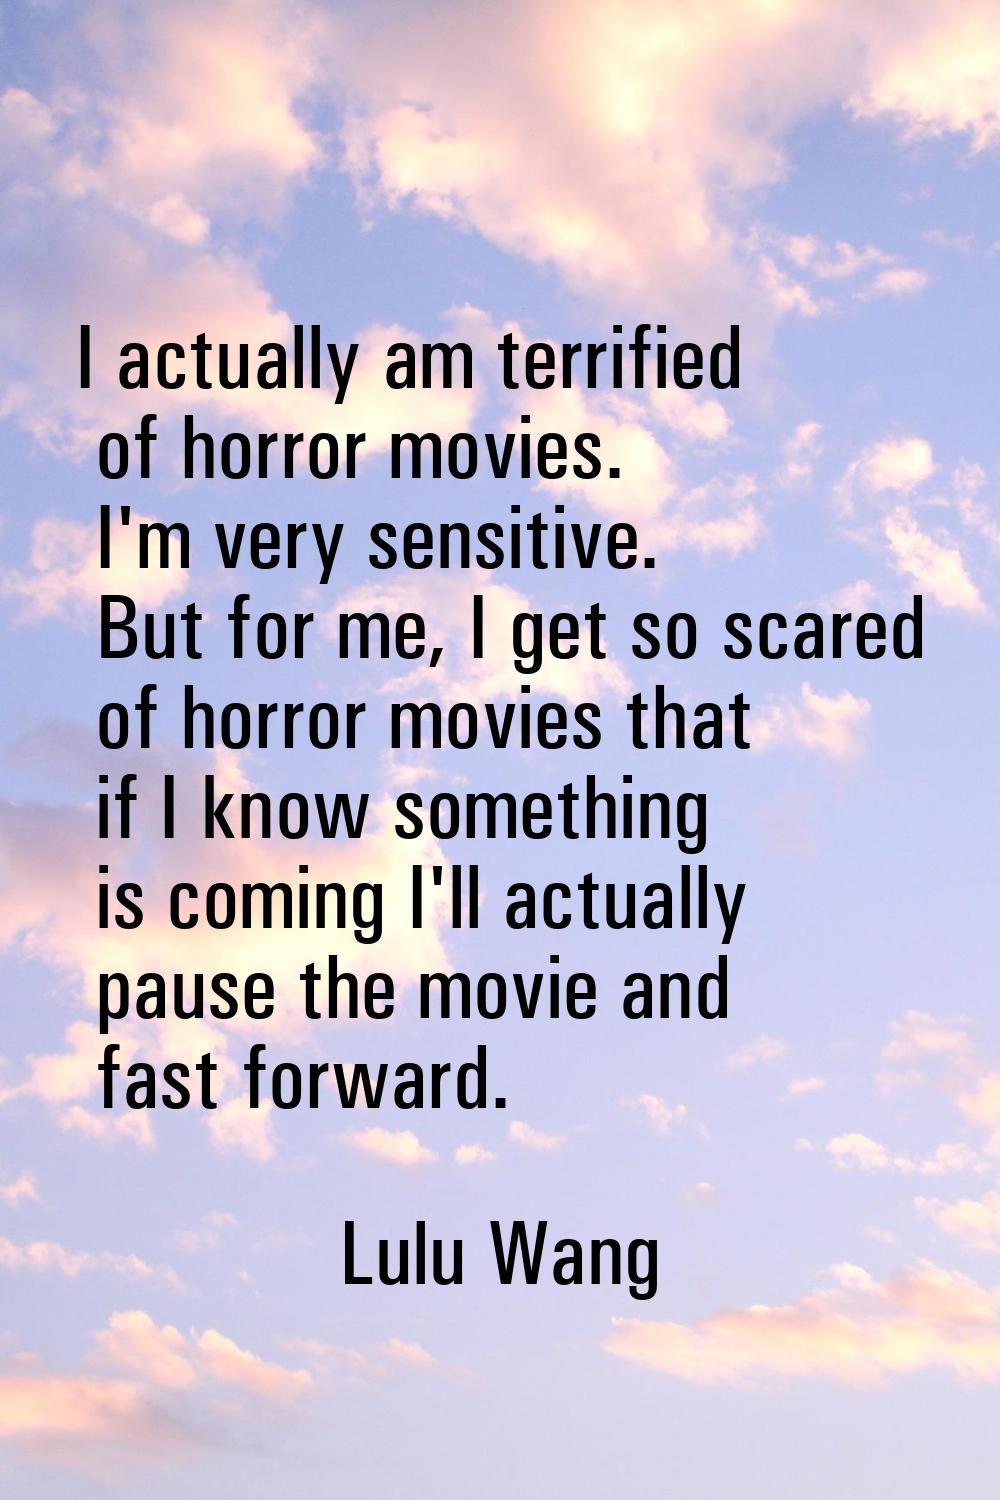 I actually am terrified of horror movies. I'm very sensitive. But for me, I get so scared of horror